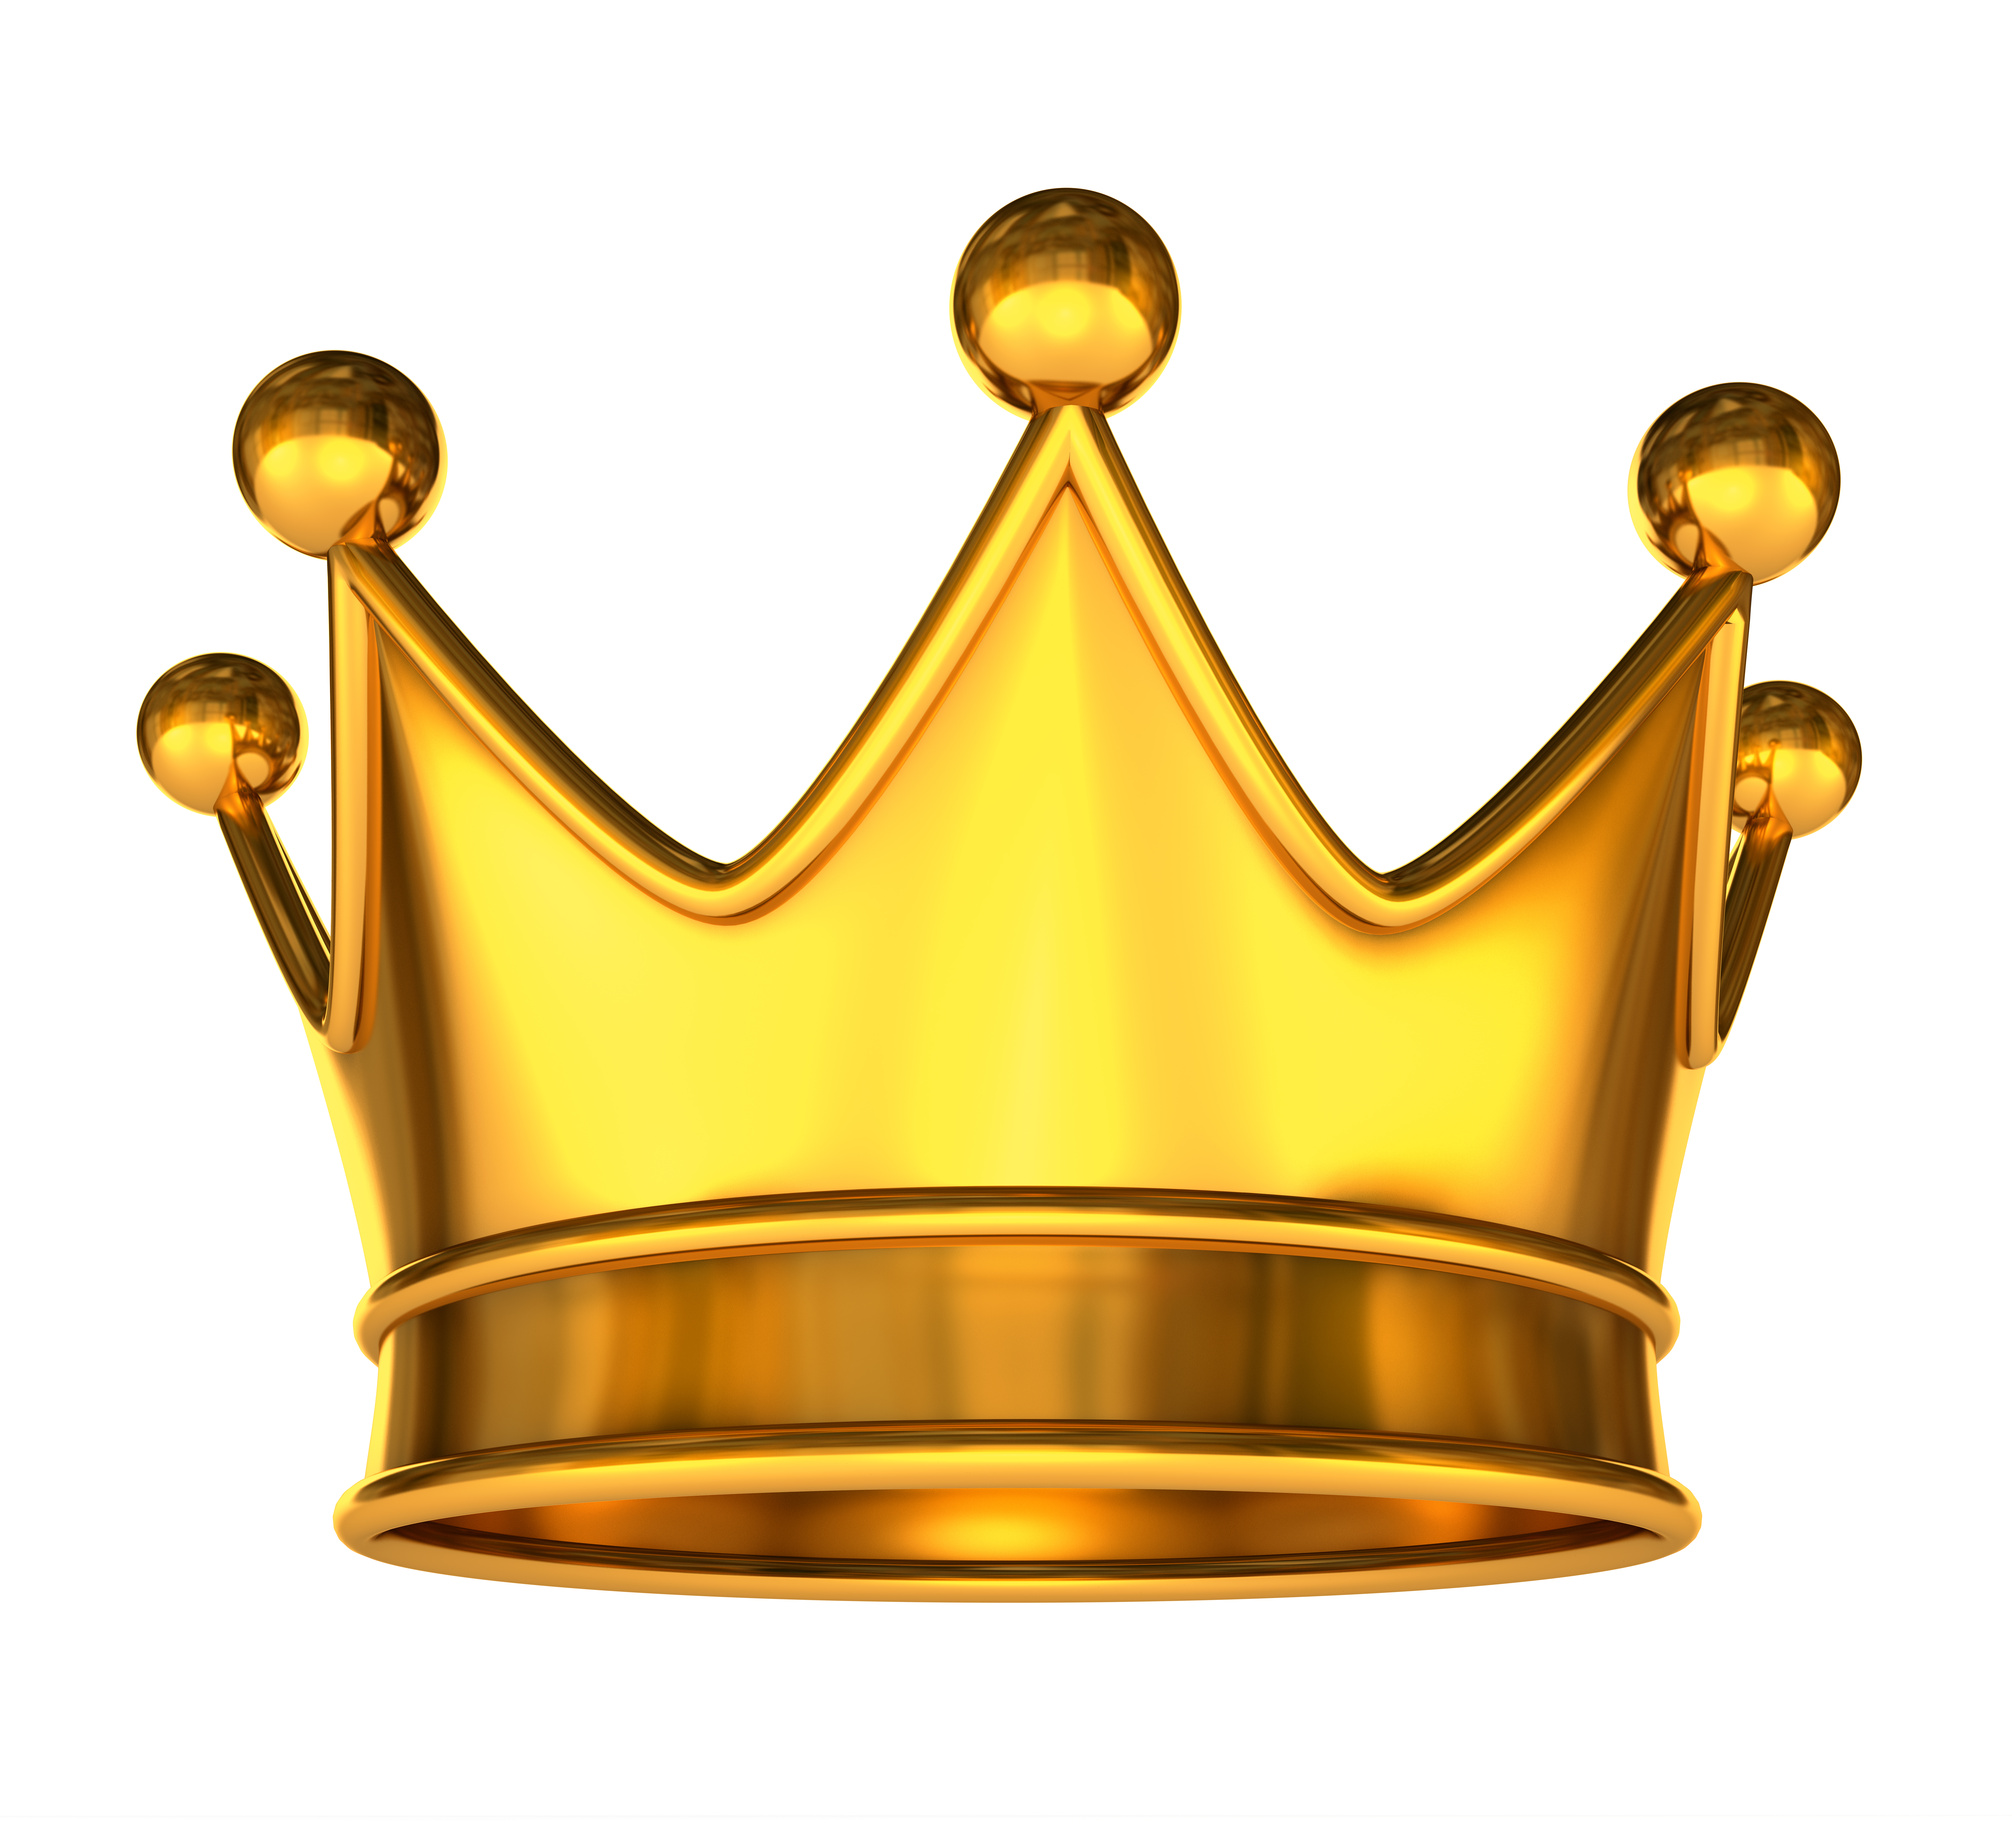 Prince Crown Clipart | Free download on ClipArtMag